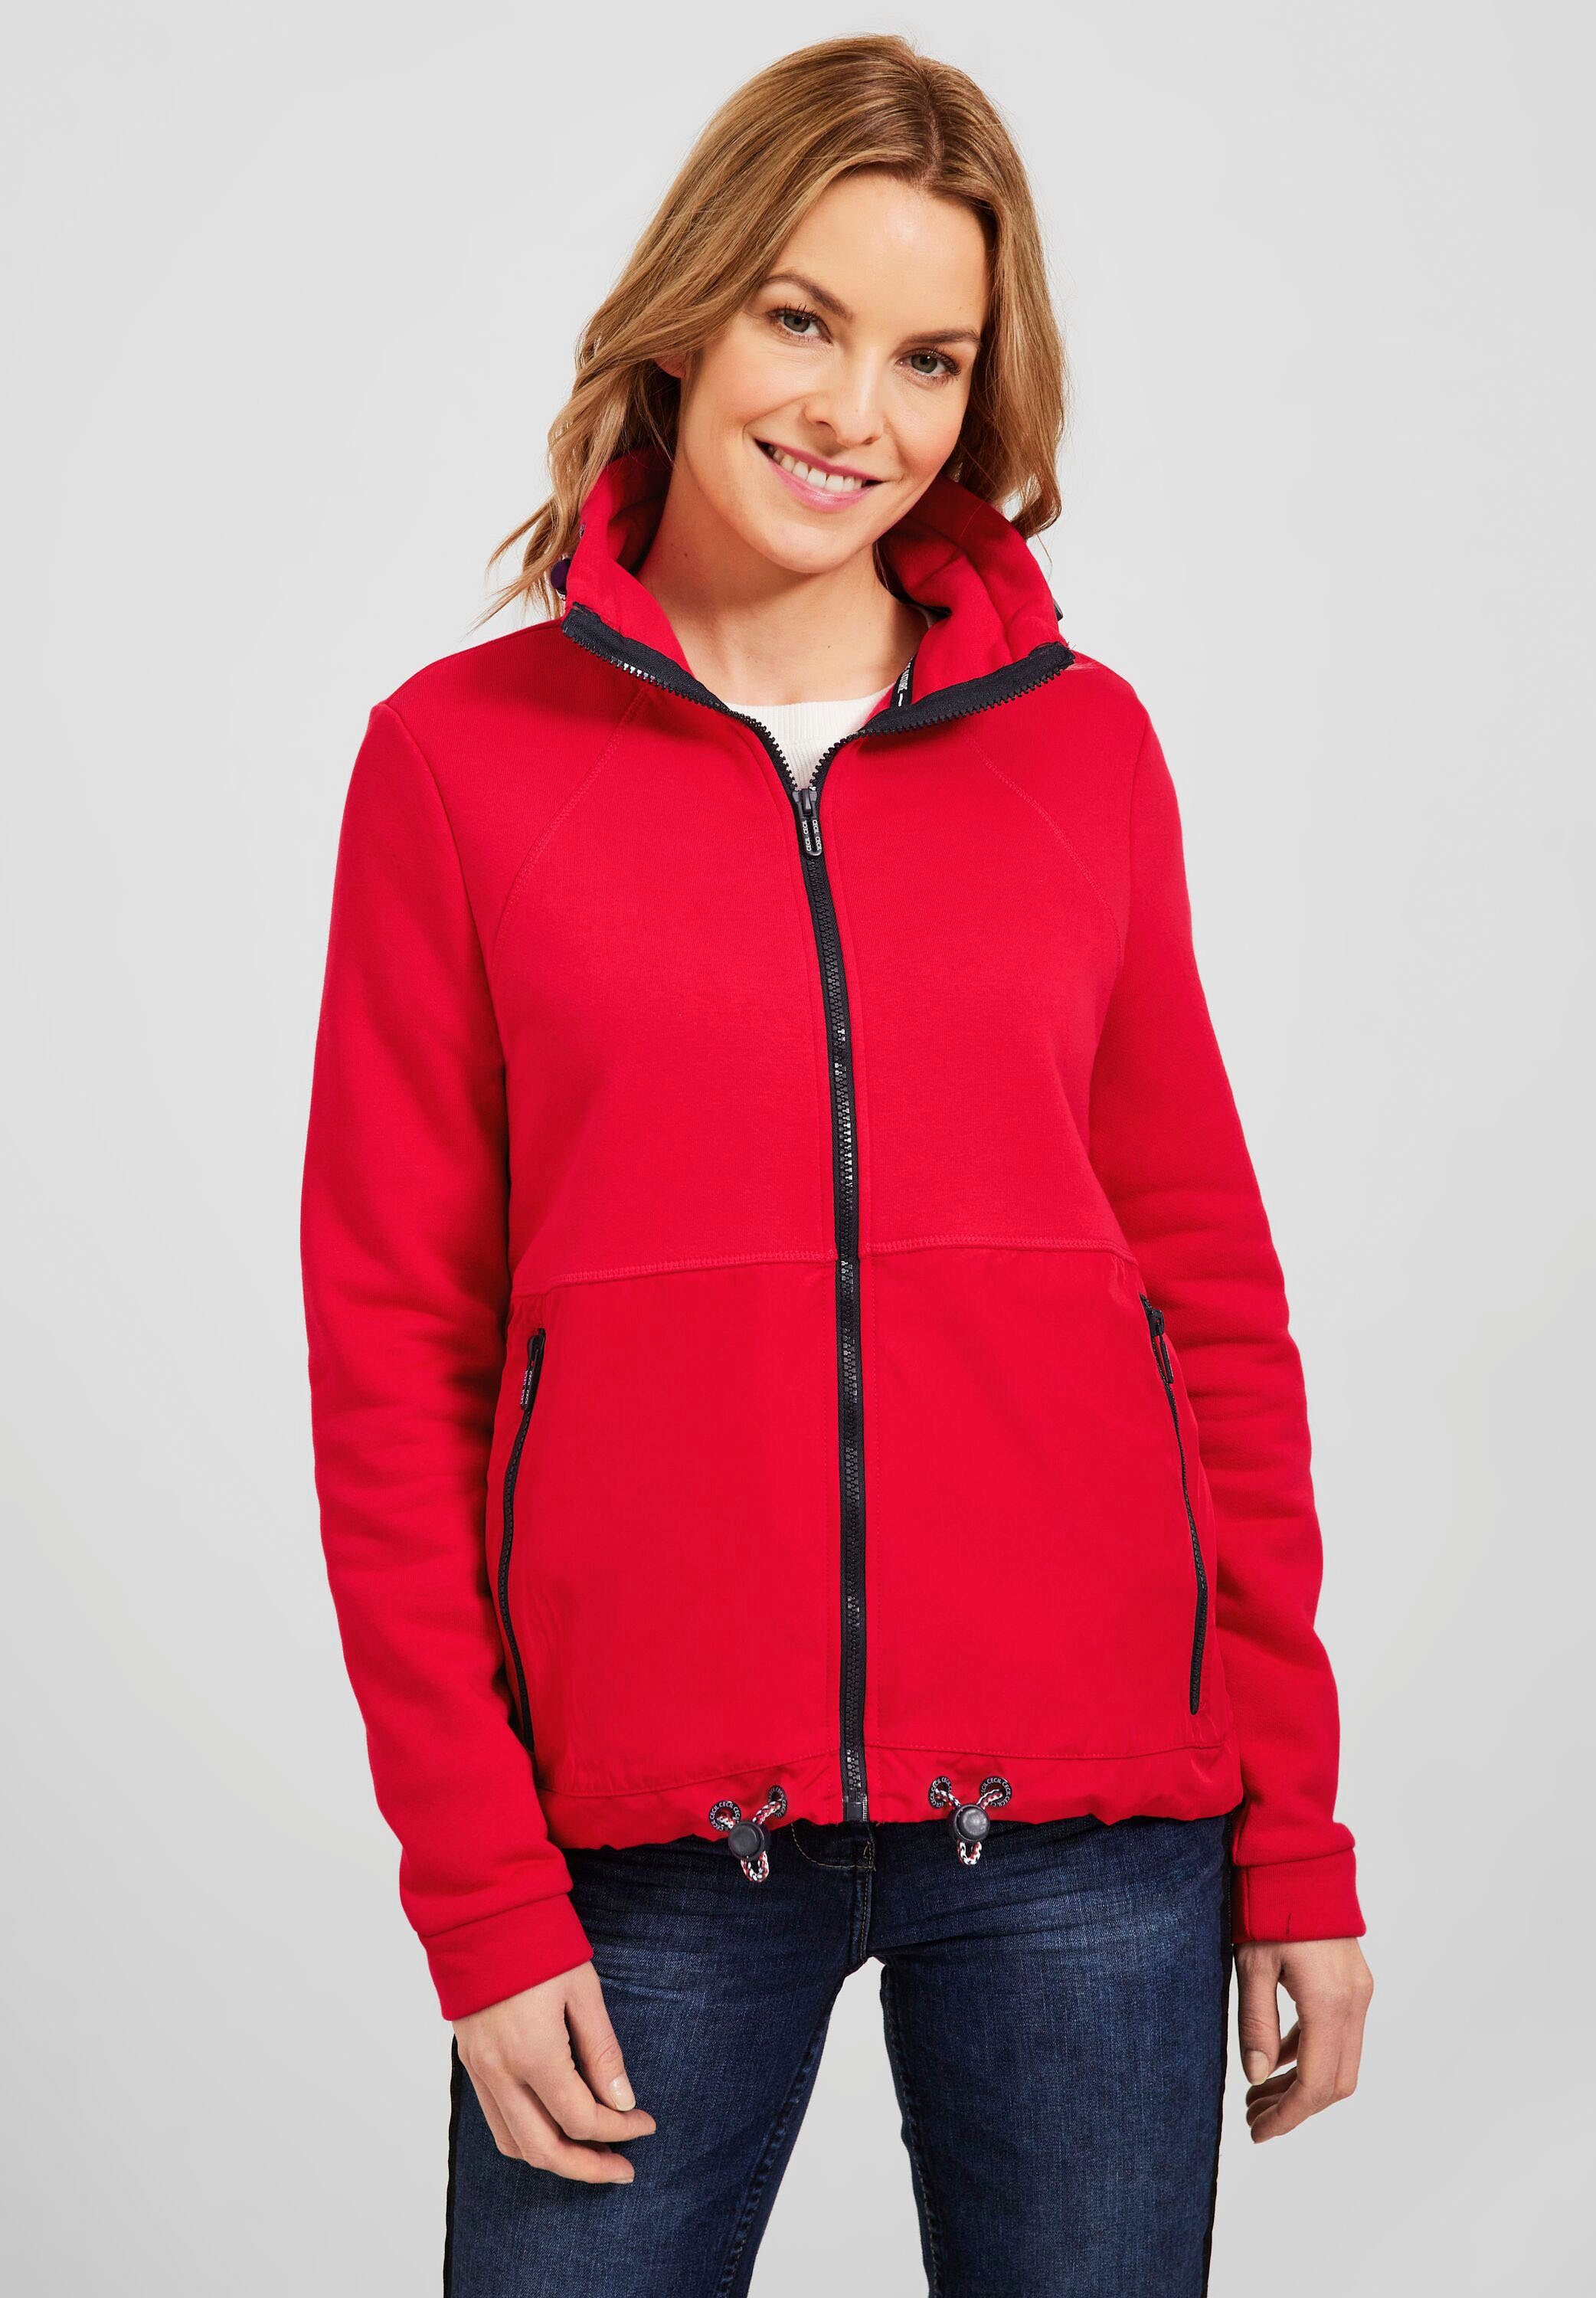 Cecil Sweatjacke im Materialmix modernen strong red